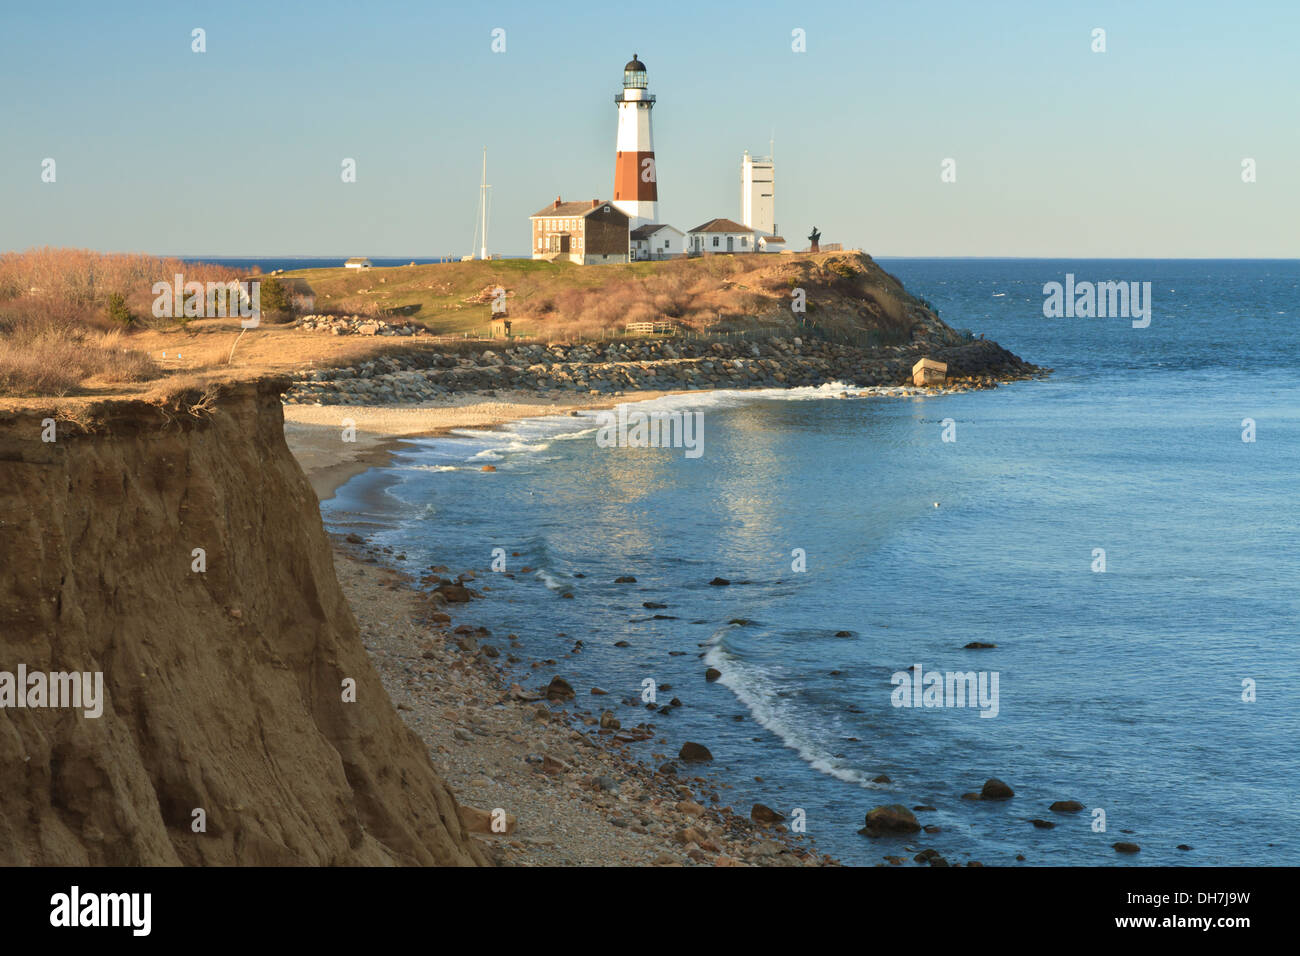 Montauk Lighthouse with an eroding bluff in the foreground on the Eastern tip of Long Island, New York Stock Photo